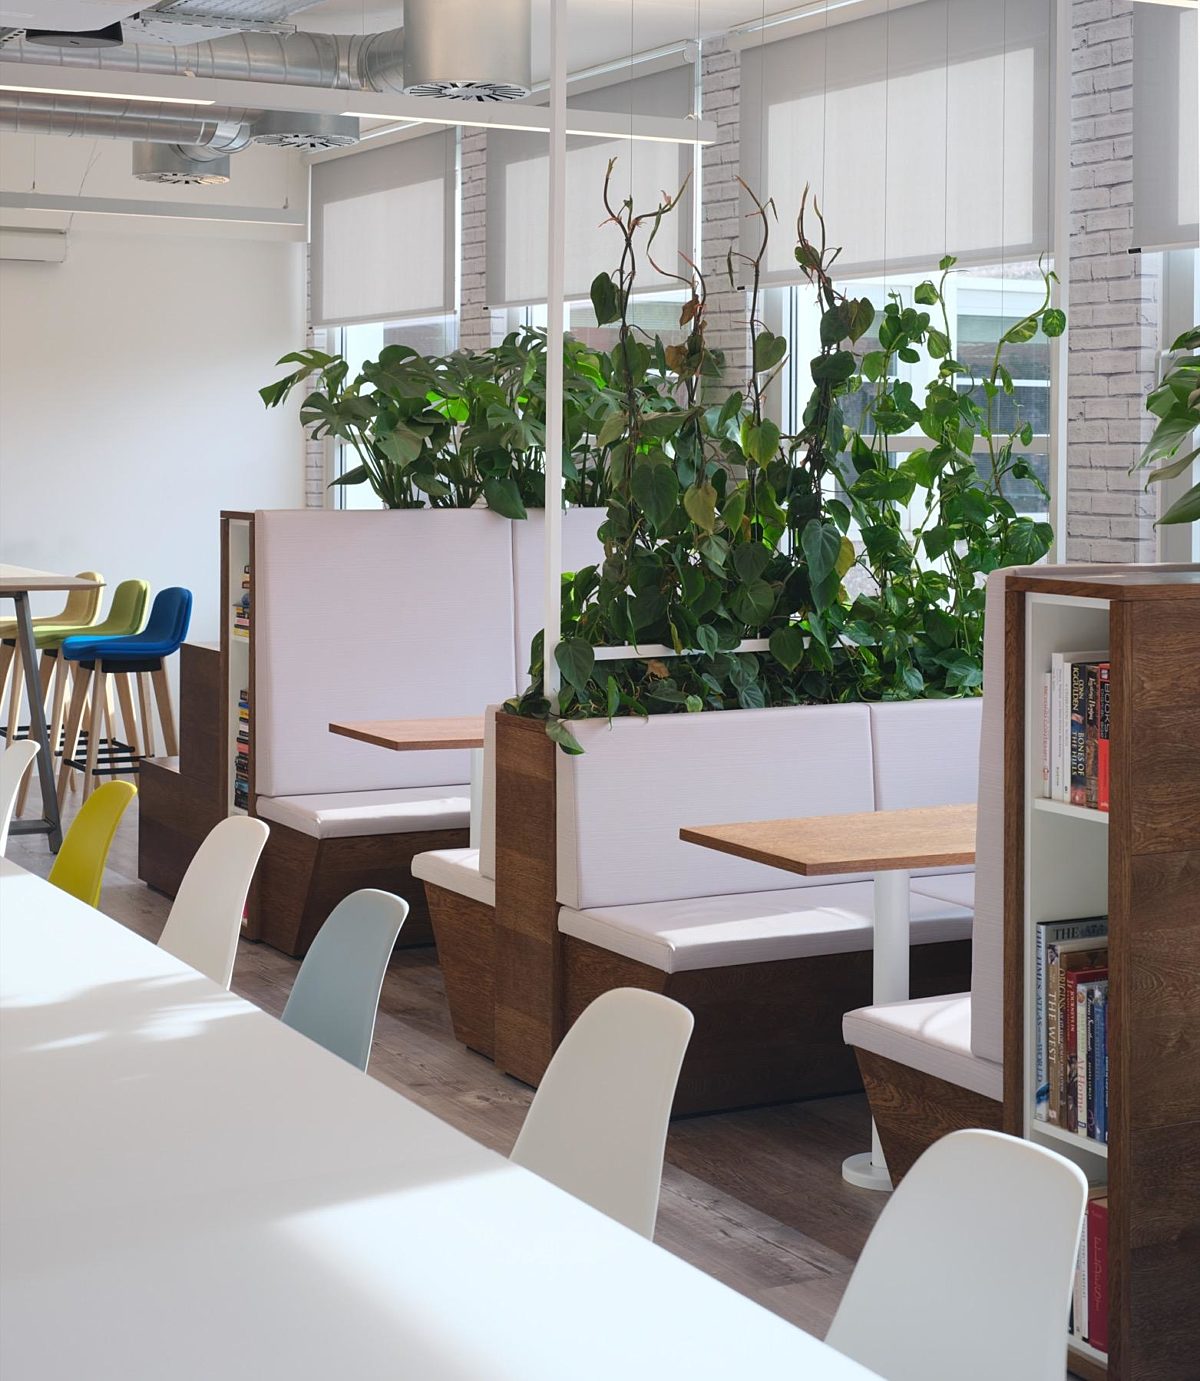 Sage biophilia in the workplace